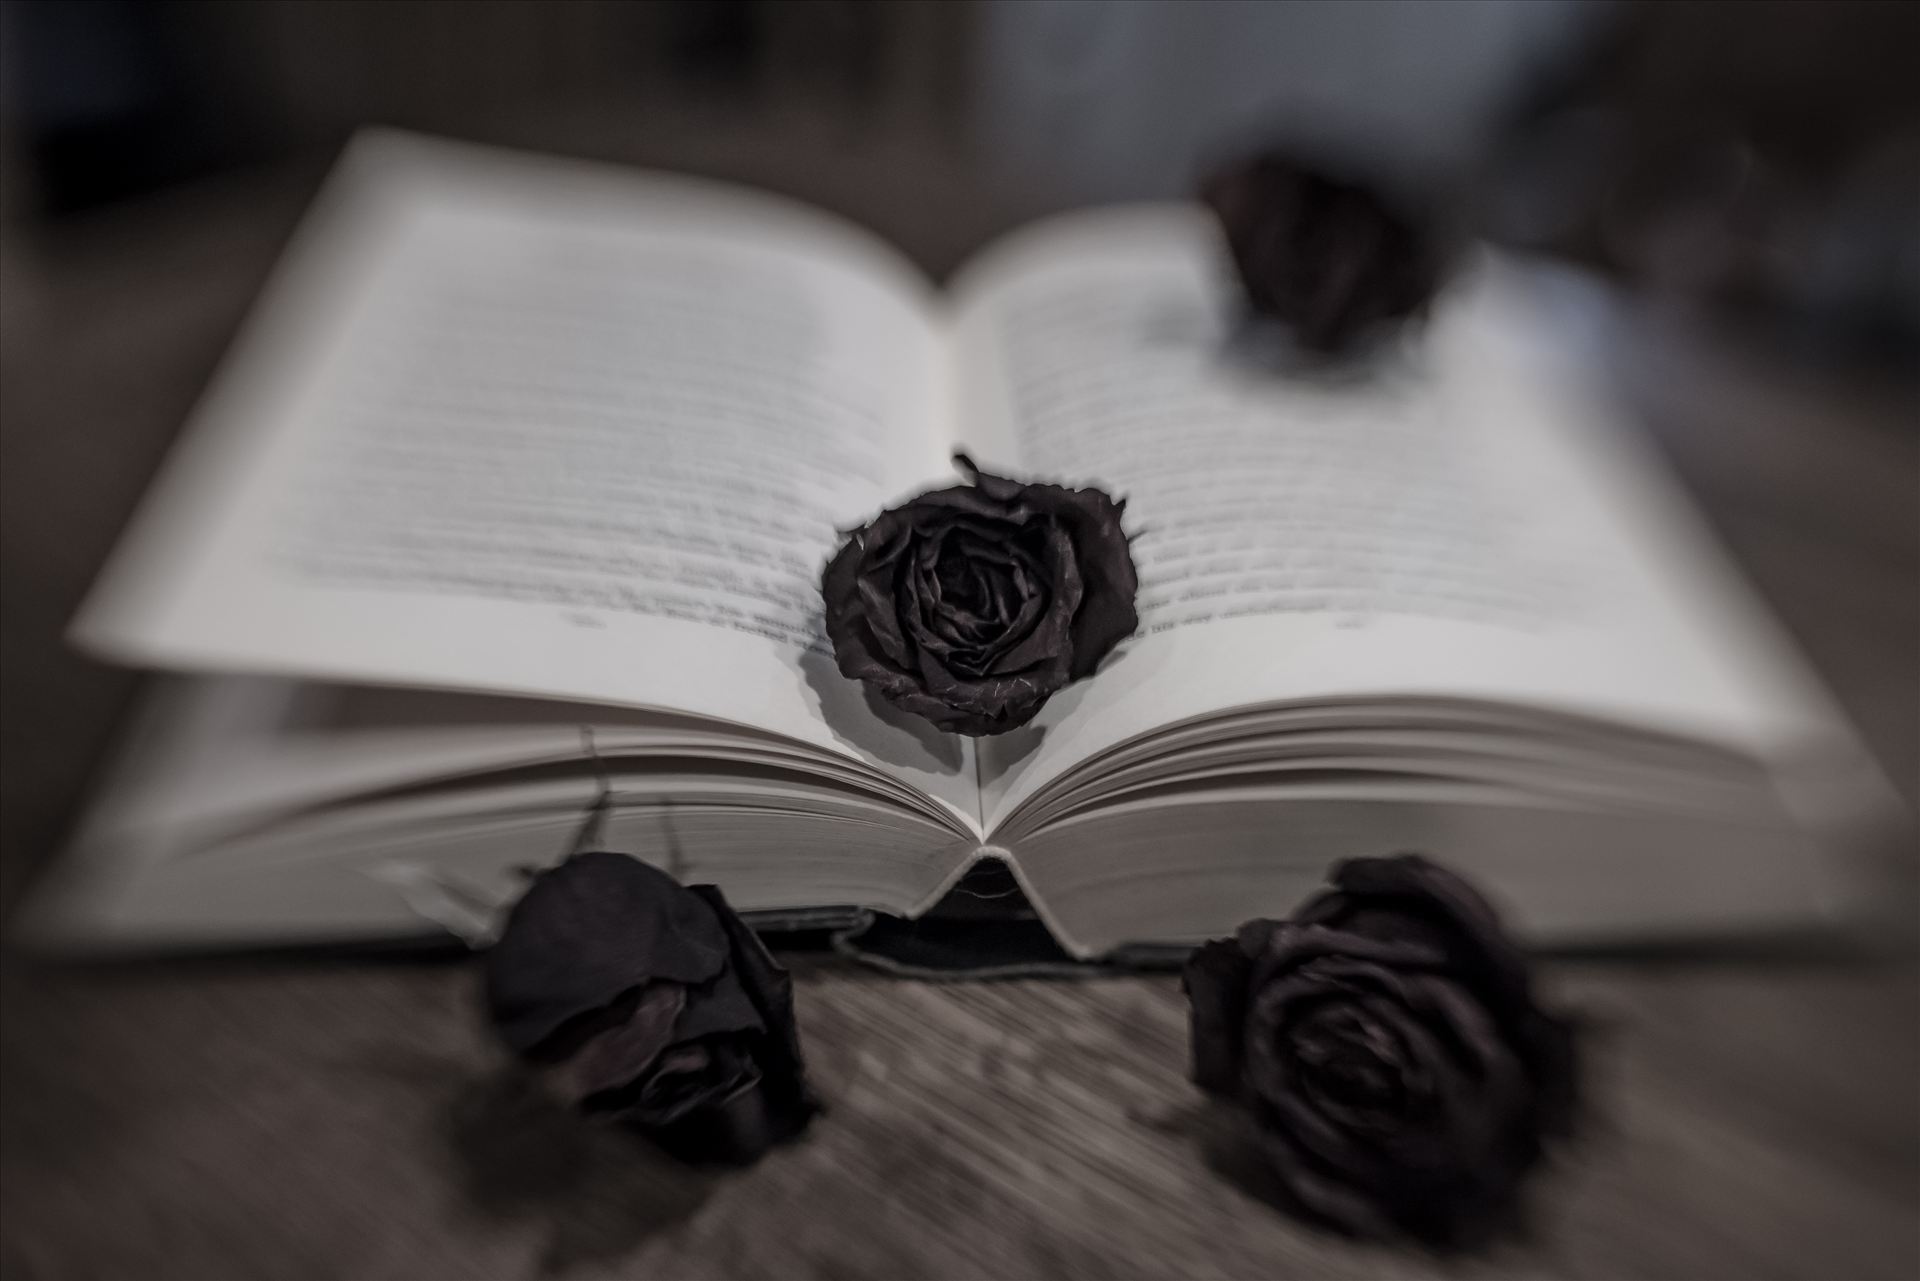 Black Roses.jpg Black roses in a book in modern art style with Lensbaby Sweet 35 by Sarah Williams